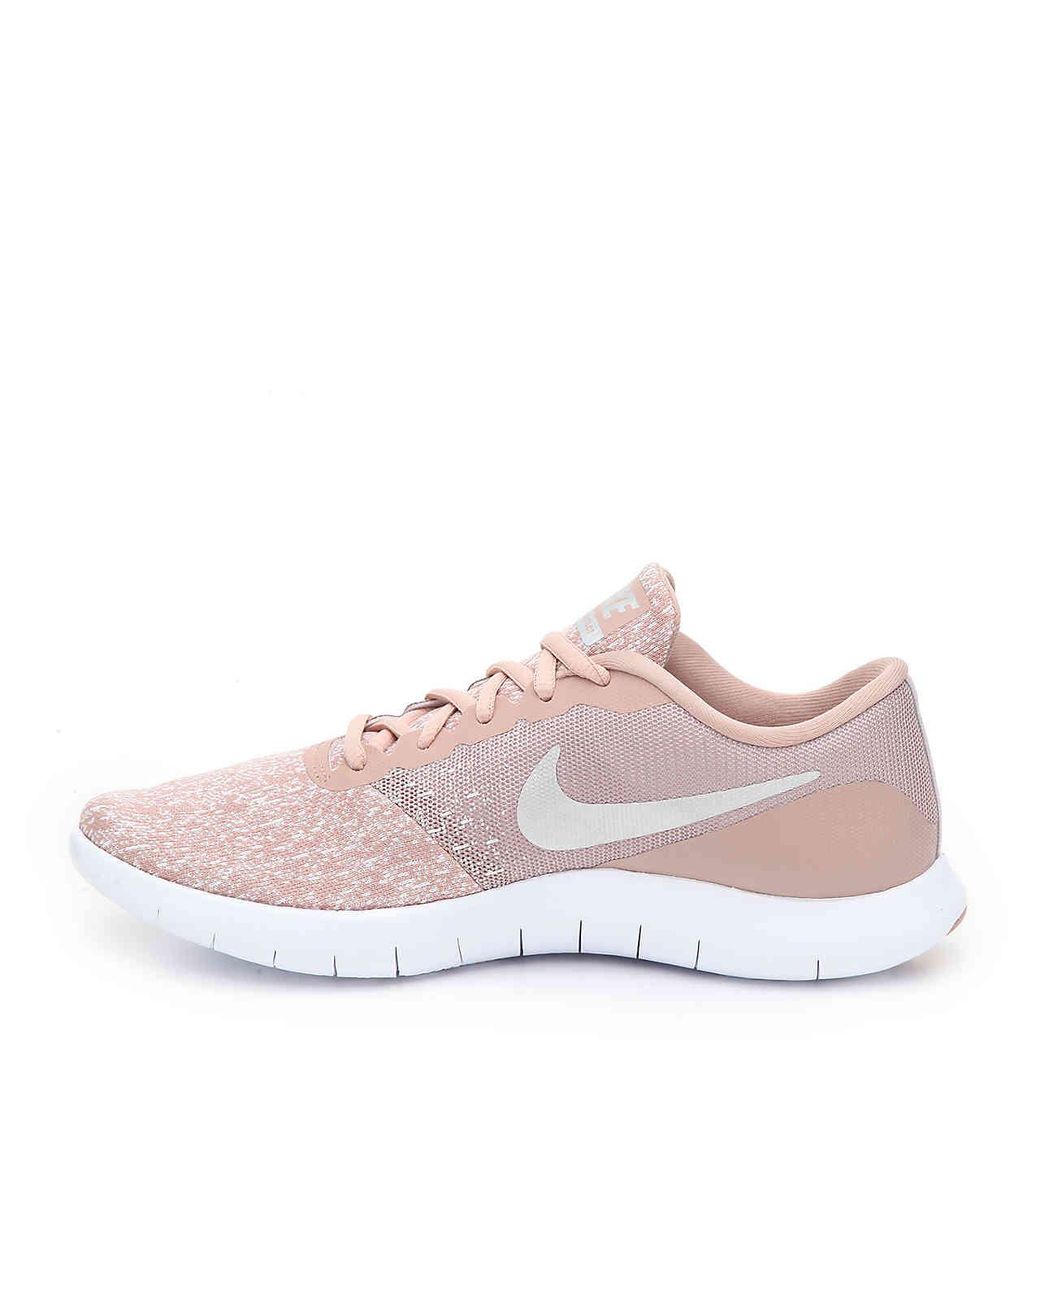 Nike Synthetic Flex Contact Lightweight Running Shoe in Dusty Pink (Pink) |  Lyst